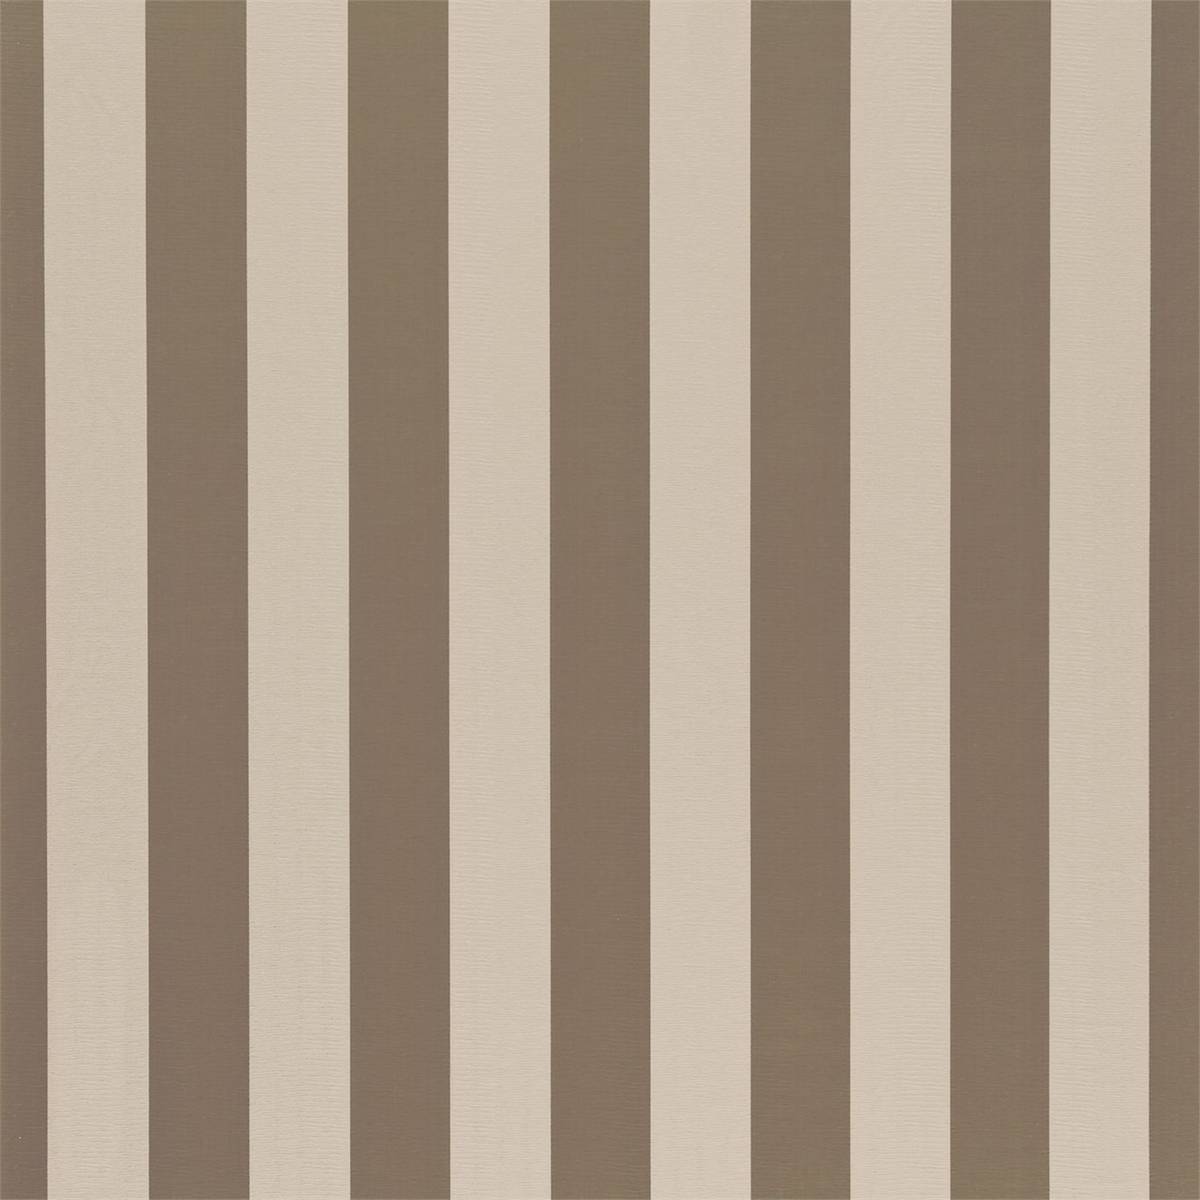 Empathy Stripe Coffee and Latte Fabric by Harlequin